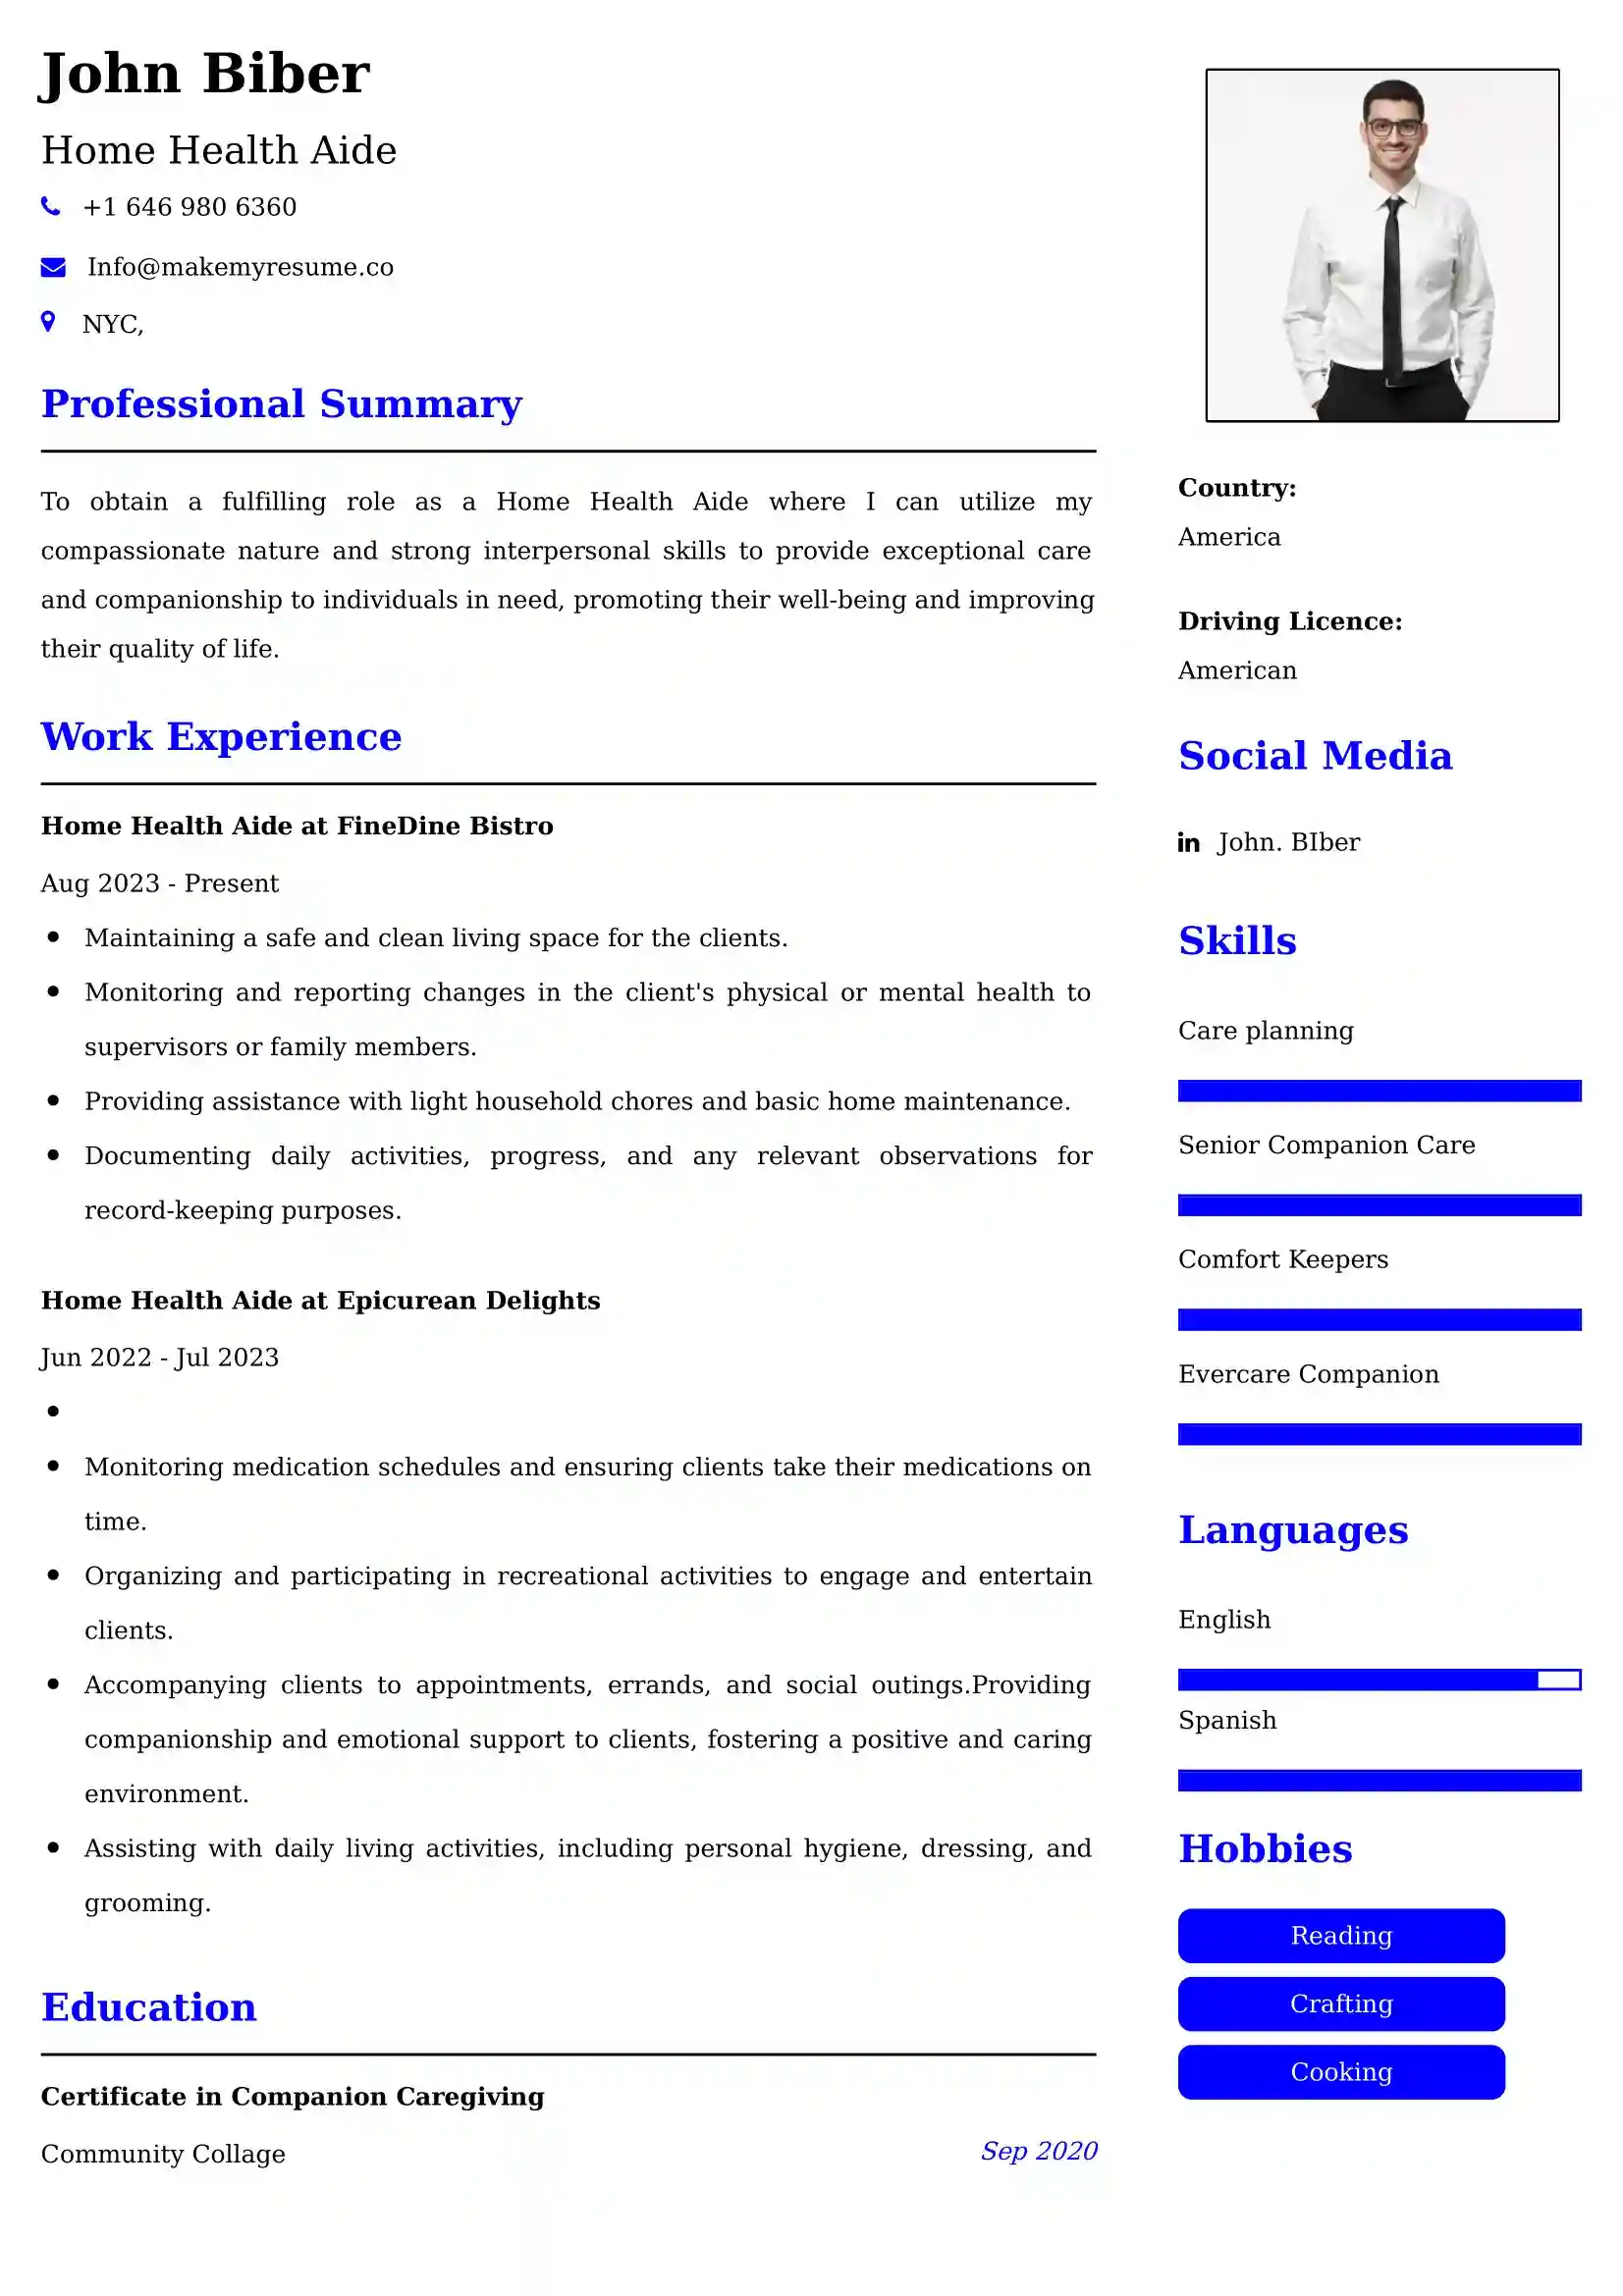 Home Health Aide CV Examples - US Format